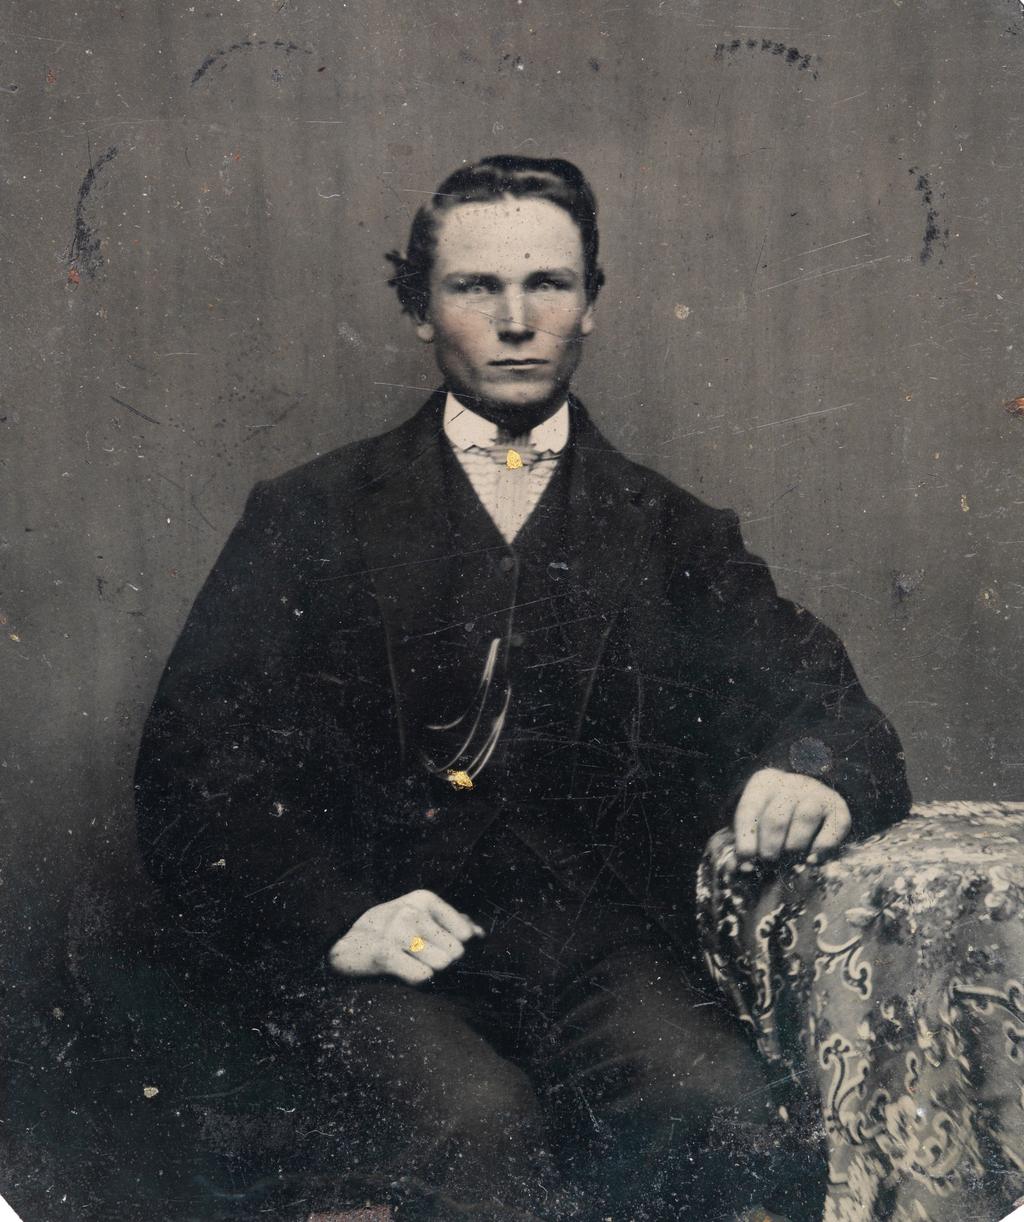 After Josephs death, his mother Lucky Mack Smith keeps the artifacts in Nauvoo, showing them frequently to